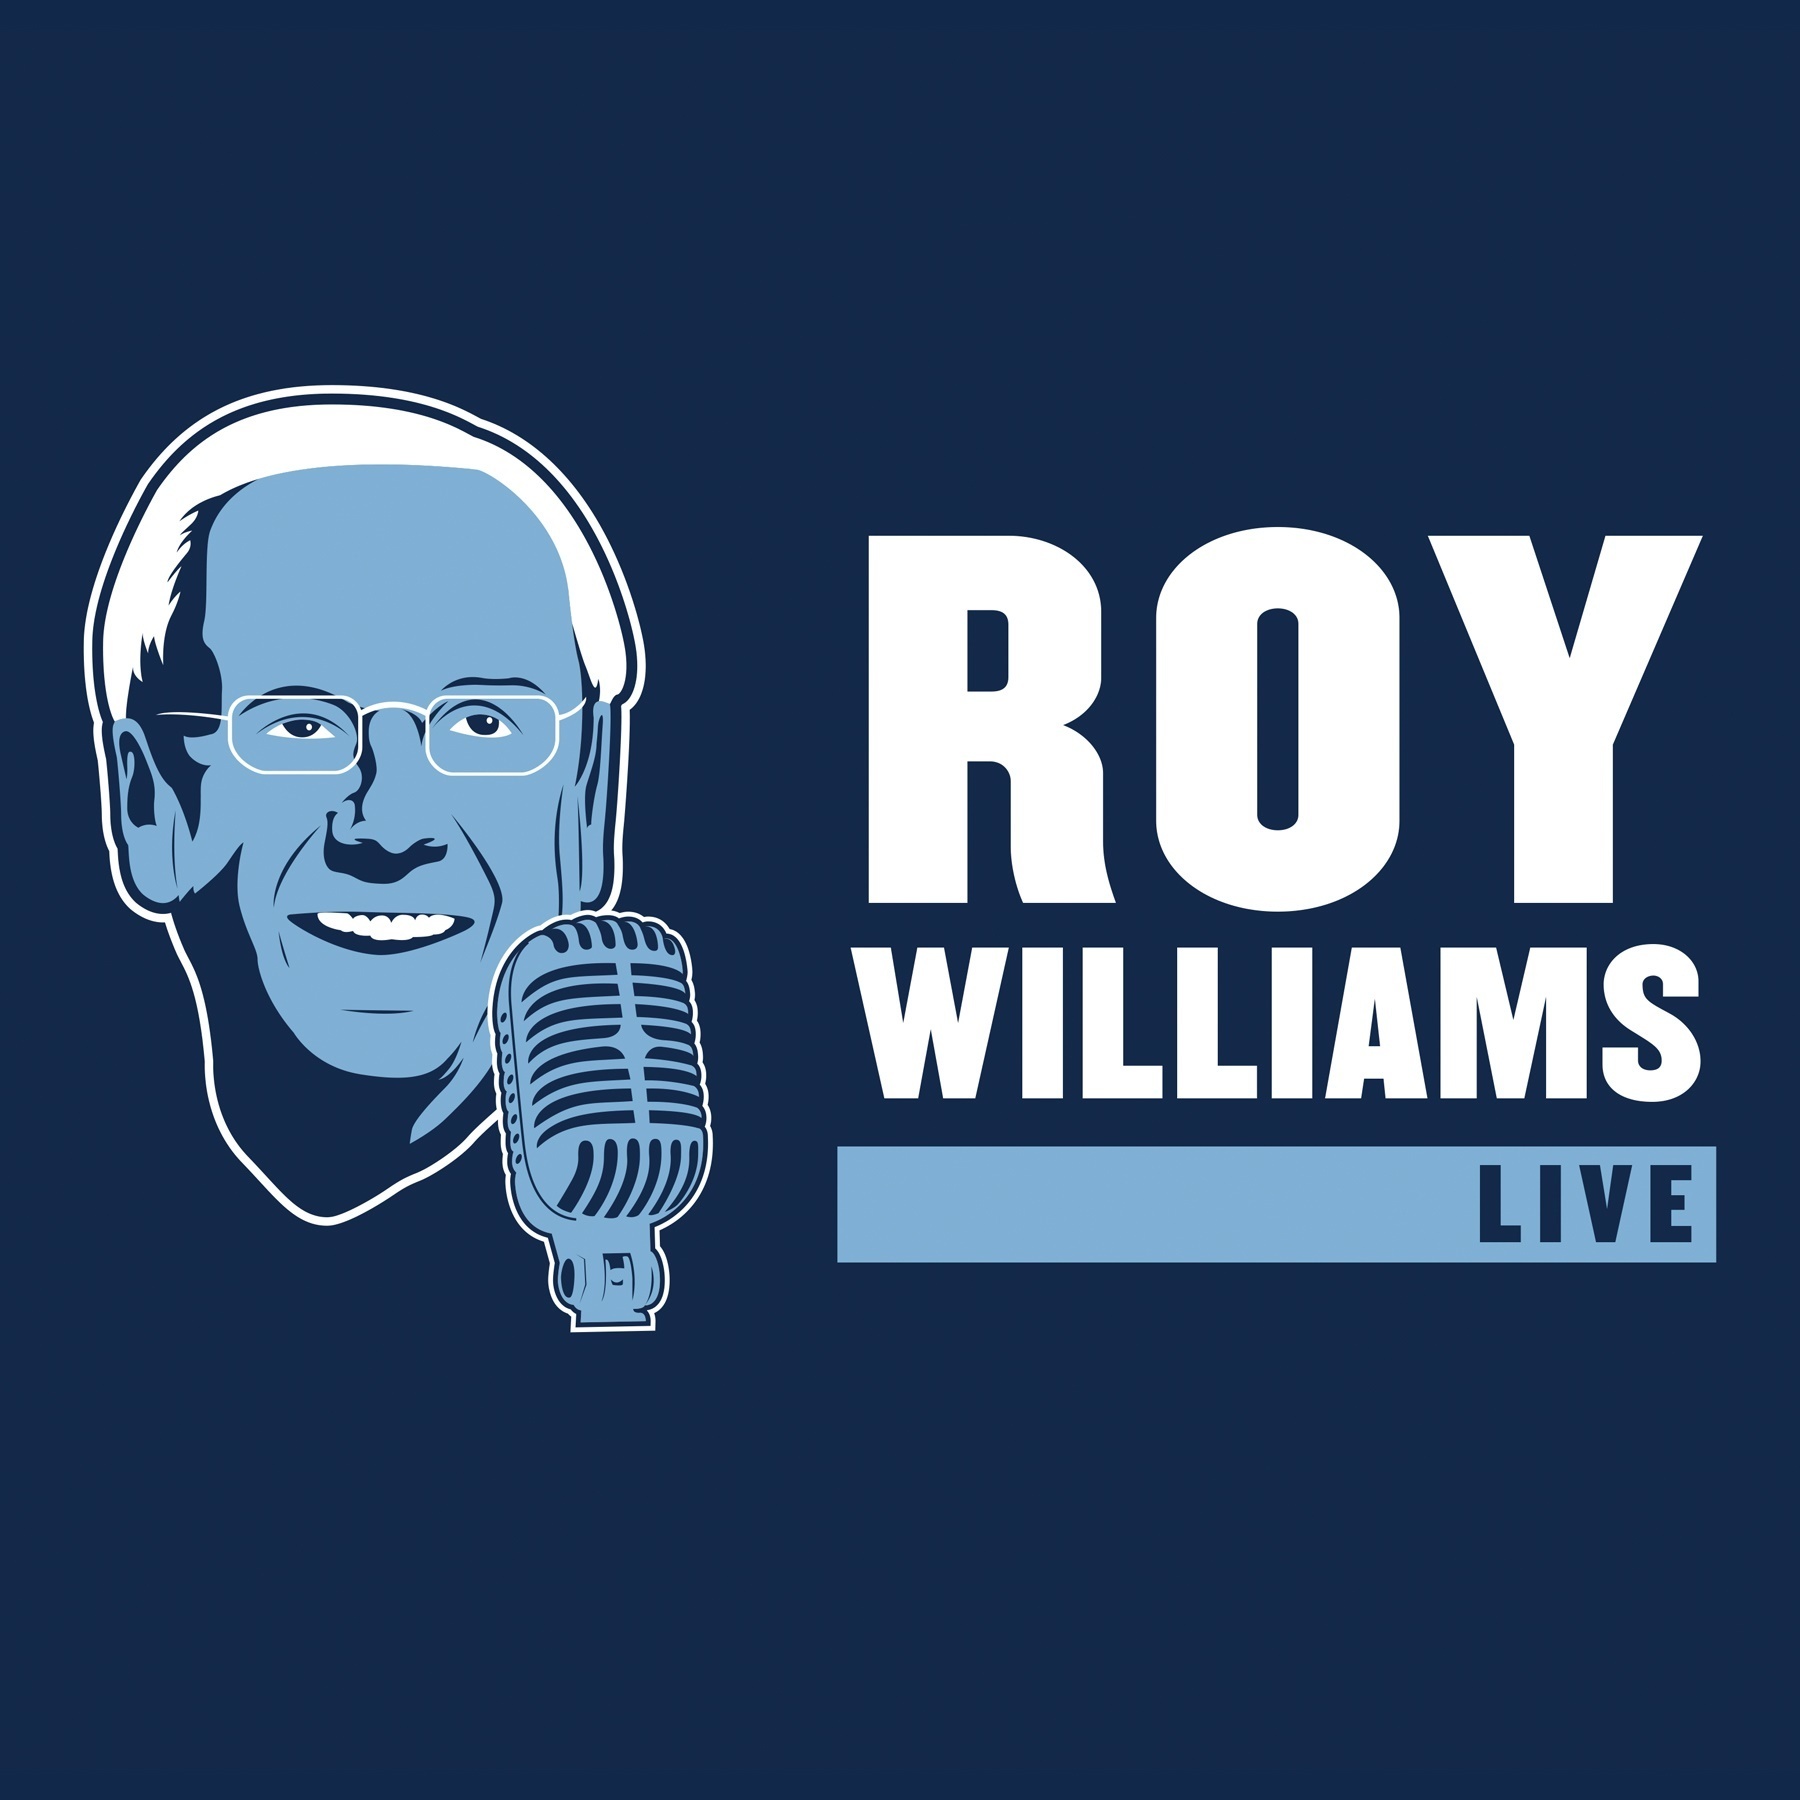 Roy Williams Live from 3-19-18